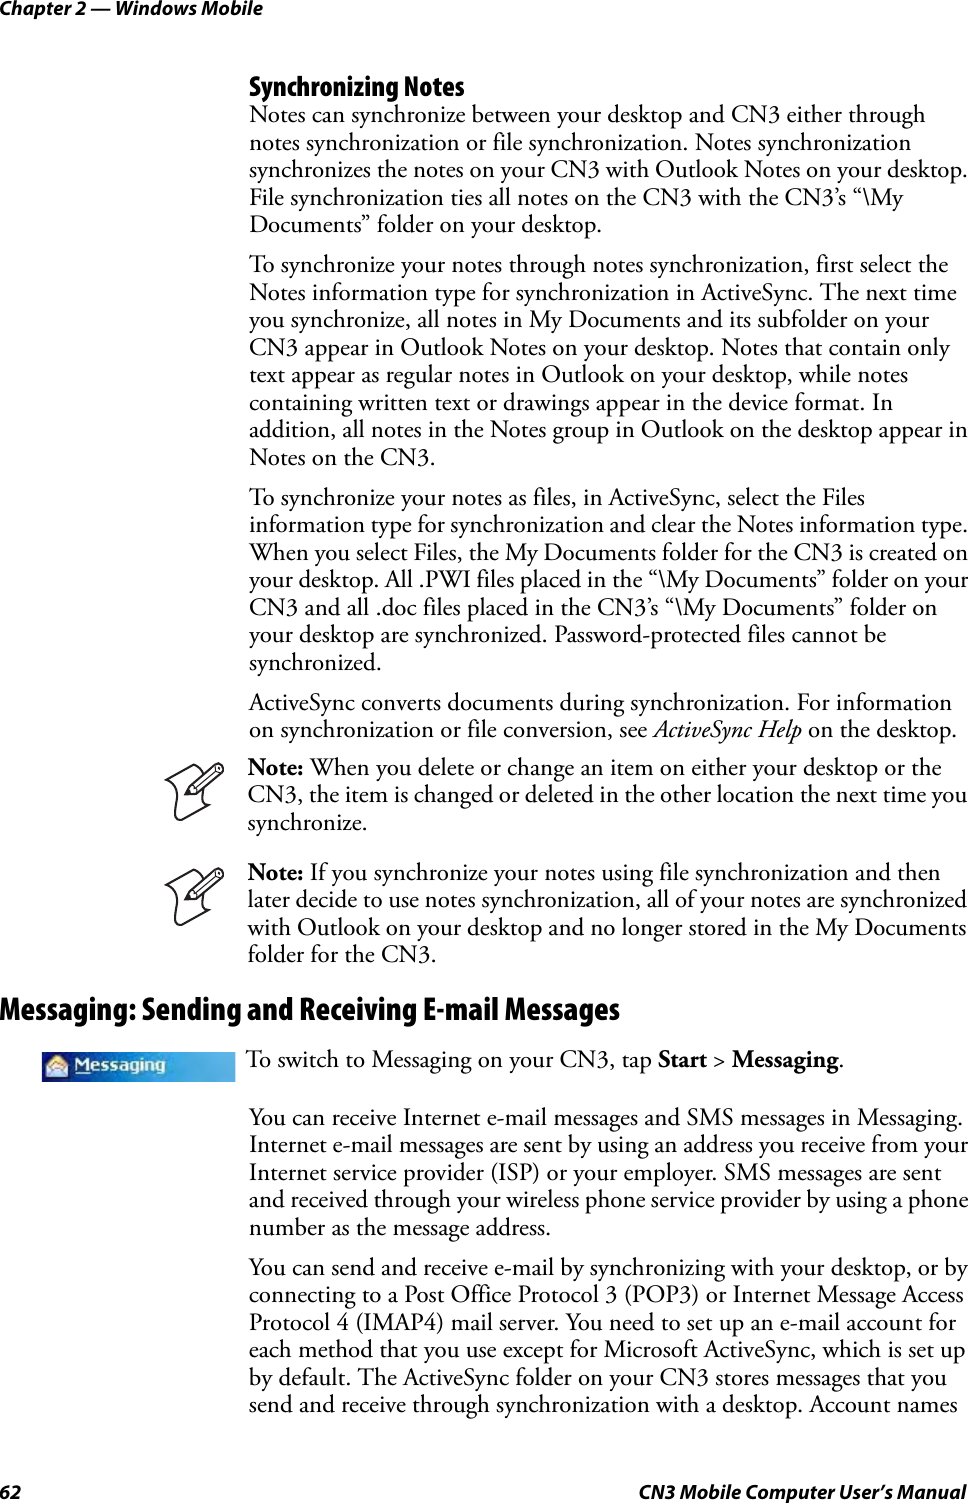 Chapter 2 — Windows Mobile62 CN3 Mobile Computer User’s ManualSynchronizing NotesNotes can synchronize between your desktop and CN3 either through notes synchronization or file synchronization. Notes synchronization synchronizes the notes on your CN3 with Outlook Notes on your desktop. File synchronization ties all notes on the CN3 with the CN3’s “\My Documents” folder on your desktop.To synchronize your notes through notes synchronization, first select the Notes information type for synchronization in ActiveSync. The next time you synchronize, all notes in My Documents and its subfolder on your CN3 appear in Outlook Notes on your desktop. Notes that contain only text appear as regular notes in Outlook on your desktop, while notes containing written text or drawings appear in the device format. In addition, all notes in the Notes group in Outlook on the desktop appear in Notes on the CN3.To synchronize your notes as files, in ActiveSync, select the Files information type for synchronization and clear the Notes information type. When you select Files, the My Documents folder for the CN3 is created on your desktop. All .PWI files placed in the “\My Documents” folder on your CN3 and all .doc files placed in the CN3’s “\My Documents” folder on your desktop are synchronized. Password-protected files cannot be synchronized.ActiveSync converts documents during synchronization. For information on synchronization or file conversion, see ActiveSync Help on the desktop.Messaging: Sending and Receiving E-mail MessagesYou can receive Internet e-mail messages and SMS messages in Messaging. Internet e-mail messages are sent by using an address you receive from your Internet service provider (ISP) or your employer. SMS messages are sent and received through your wireless phone service provider by using a phone number as the message address.You can send and receive e-mail by synchronizing with your desktop, or by connecting to a Post Office Protocol 3 (POP3) or Internet Message Access Protocol 4 (IMAP4) mail server. You need to set up an e-mail account for each method that you use except for Microsoft ActiveSync, which is set up by default. The ActiveSync folder on your CN3 stores messages that you send and receive through synchronization with a desktop. Account names Note: When you delete or change an item on either your desktop or the CN3, the item is changed or deleted in the other location the next time you synchronize.Note: If you synchronize your notes using file synchronization and then later decide to use notes synchronization, all of your notes are synchronized with Outlook on your desktop and no longer stored in the My Documents folder for the CN3.To switch to Messaging on your CN3, tap Start &gt; Messaging.